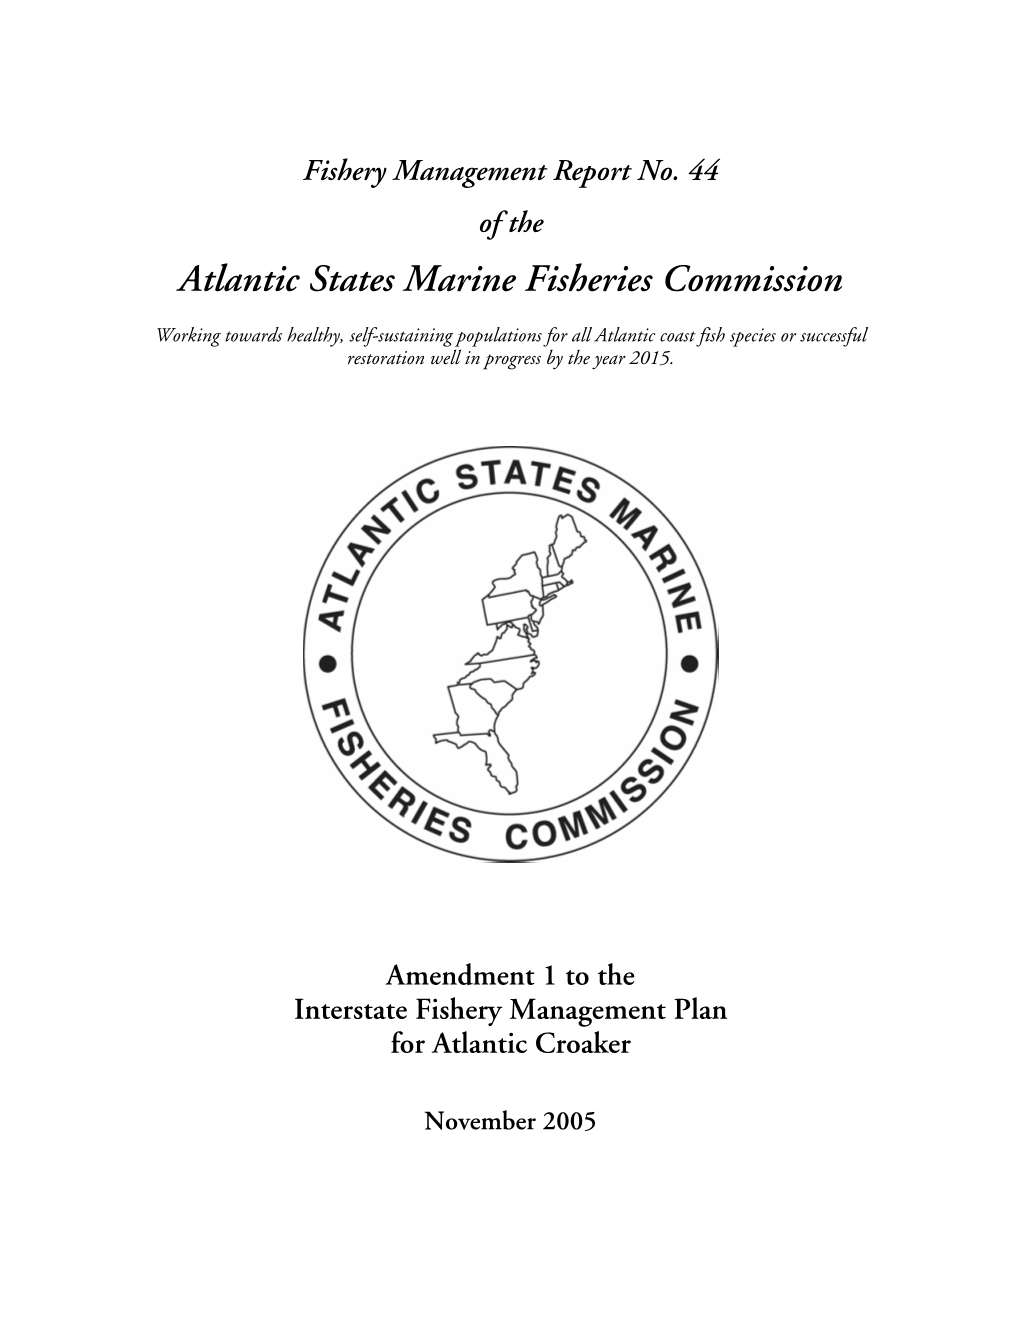 Amendment 1 to the Atlantic Croaker FMP to Come Into Compliance with the ACFCMA